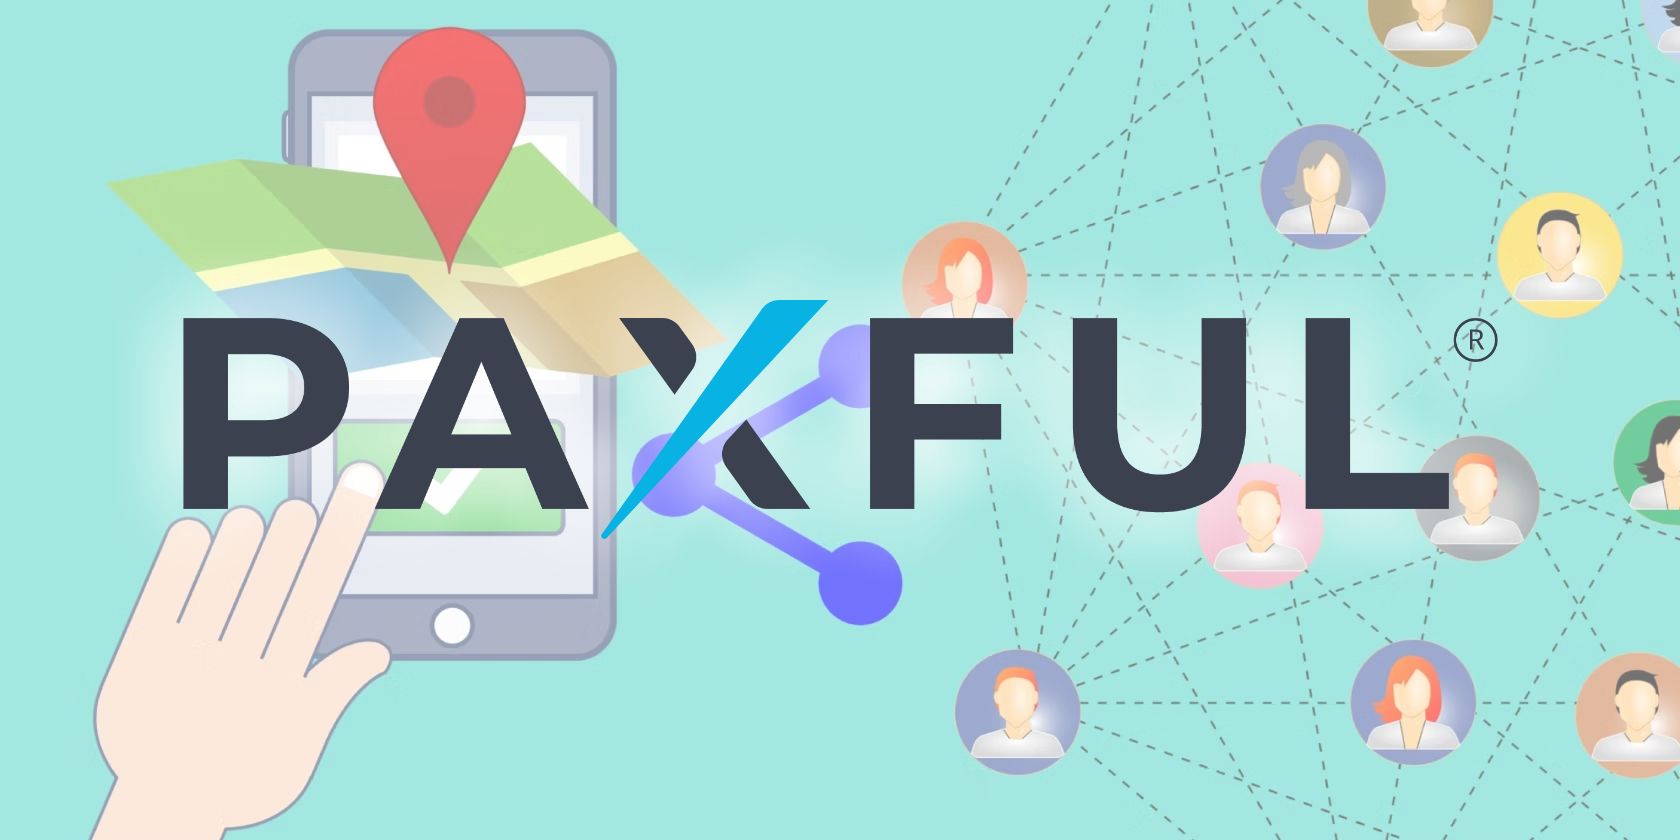 What Is Paxful? How Does It Work?